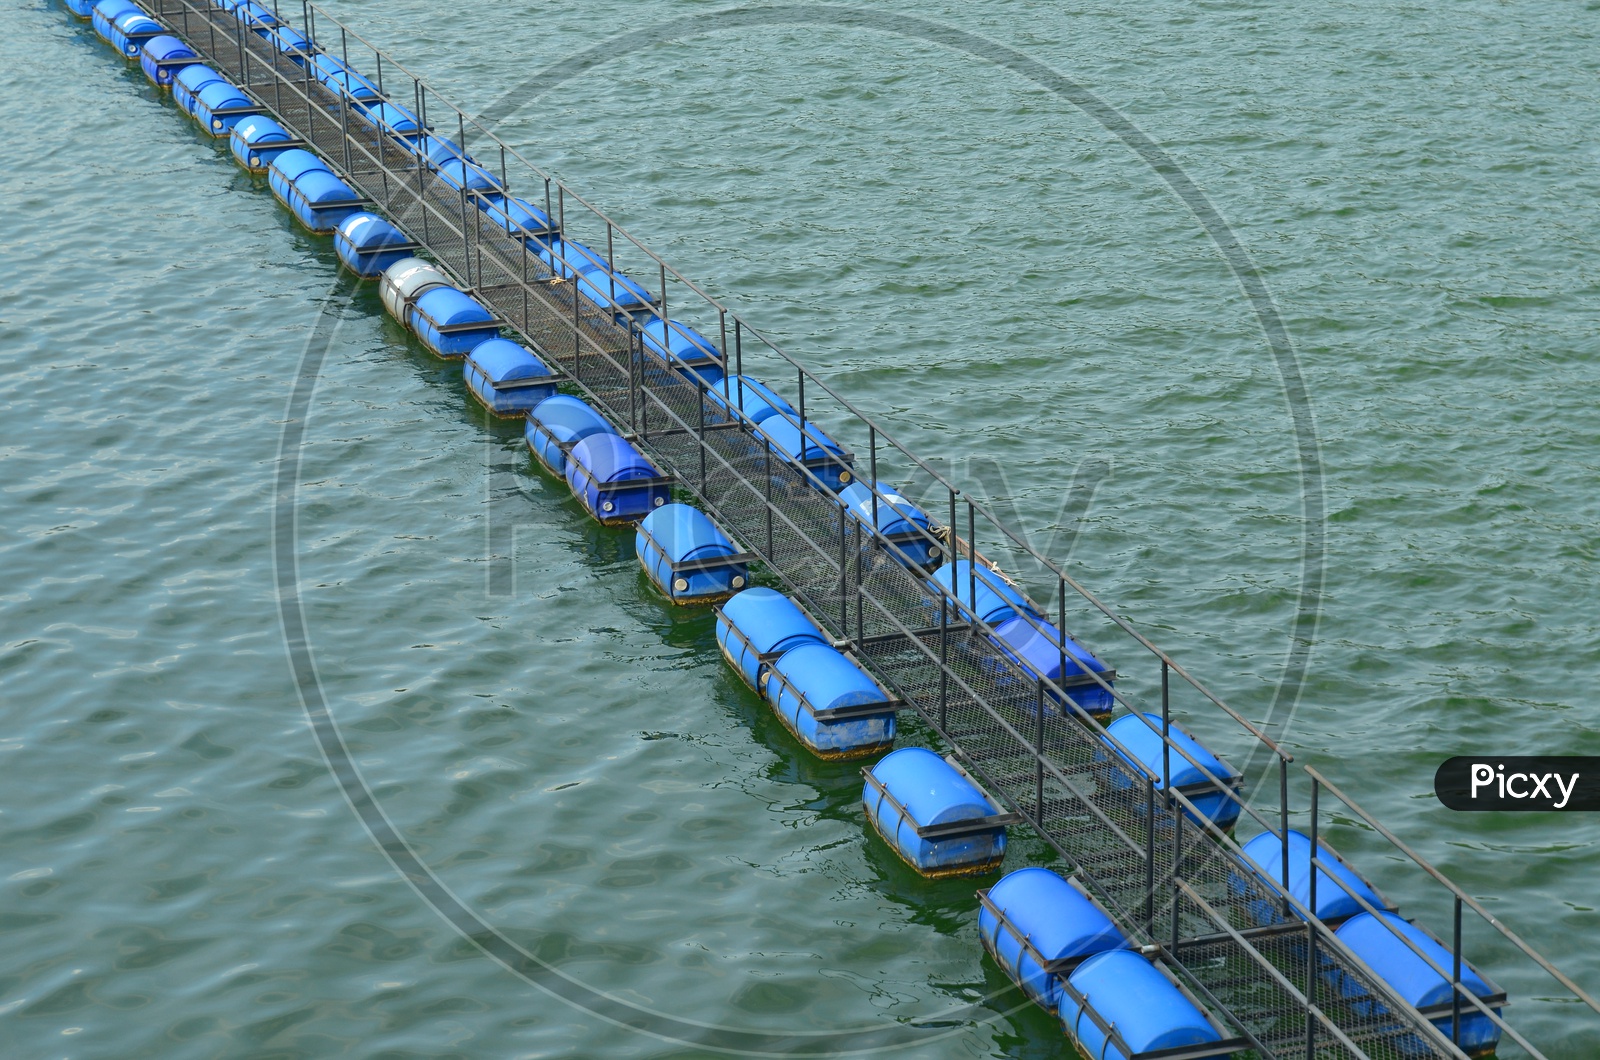 Buoy Lines  made of plastic drums floating on water in Hydroelectric Power plant of dam